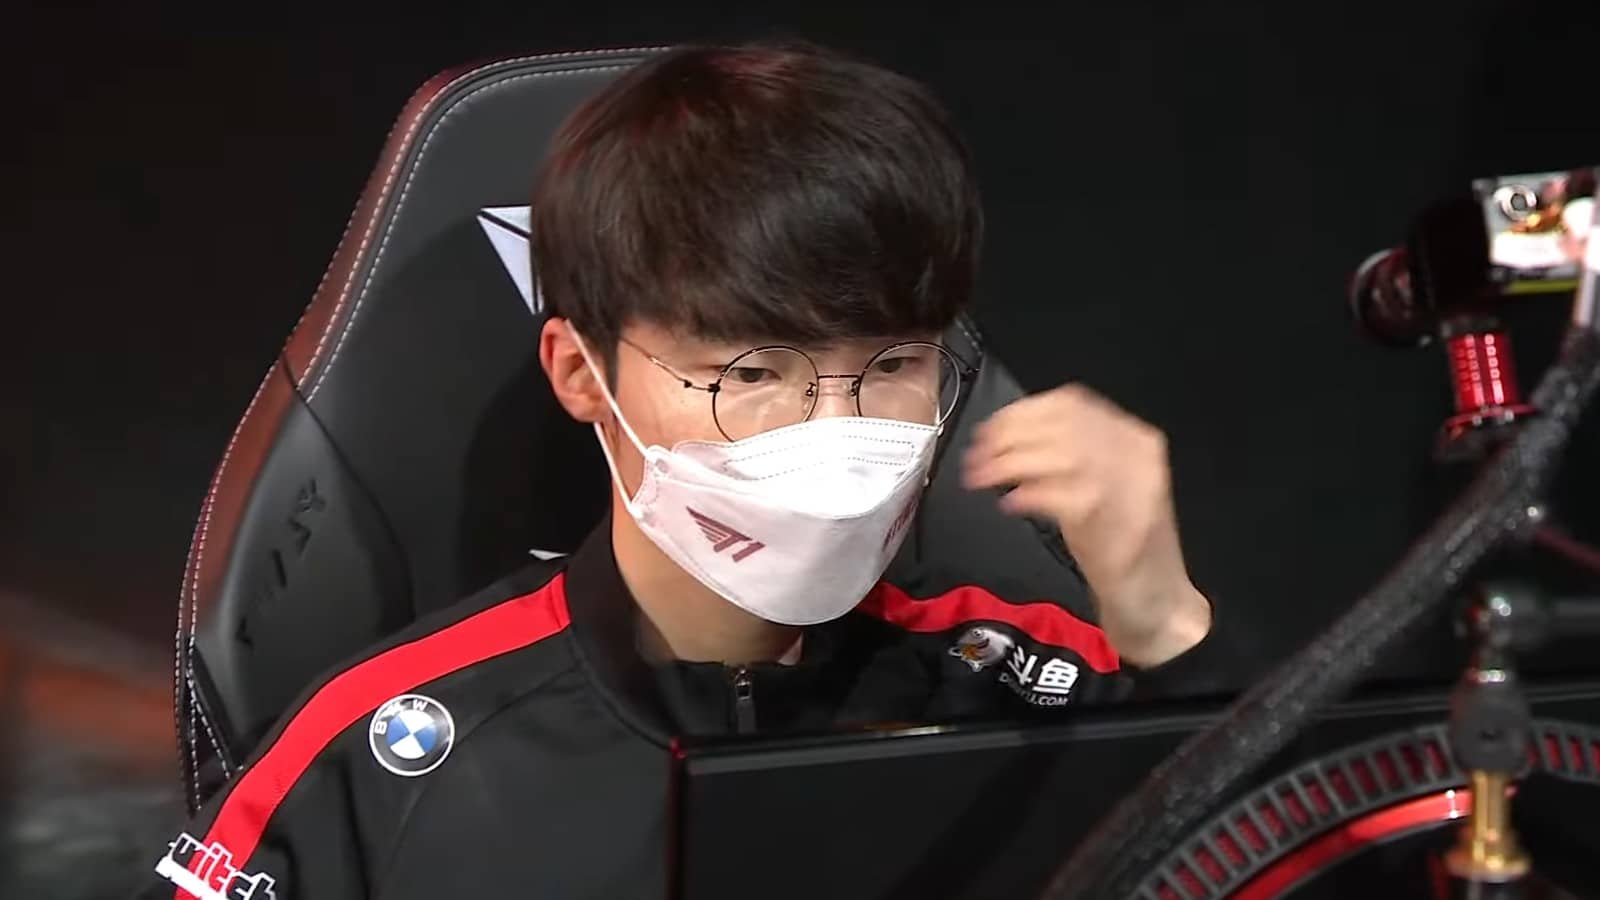 The LCK is changing rules regarding pauses after the T1/HLE series.